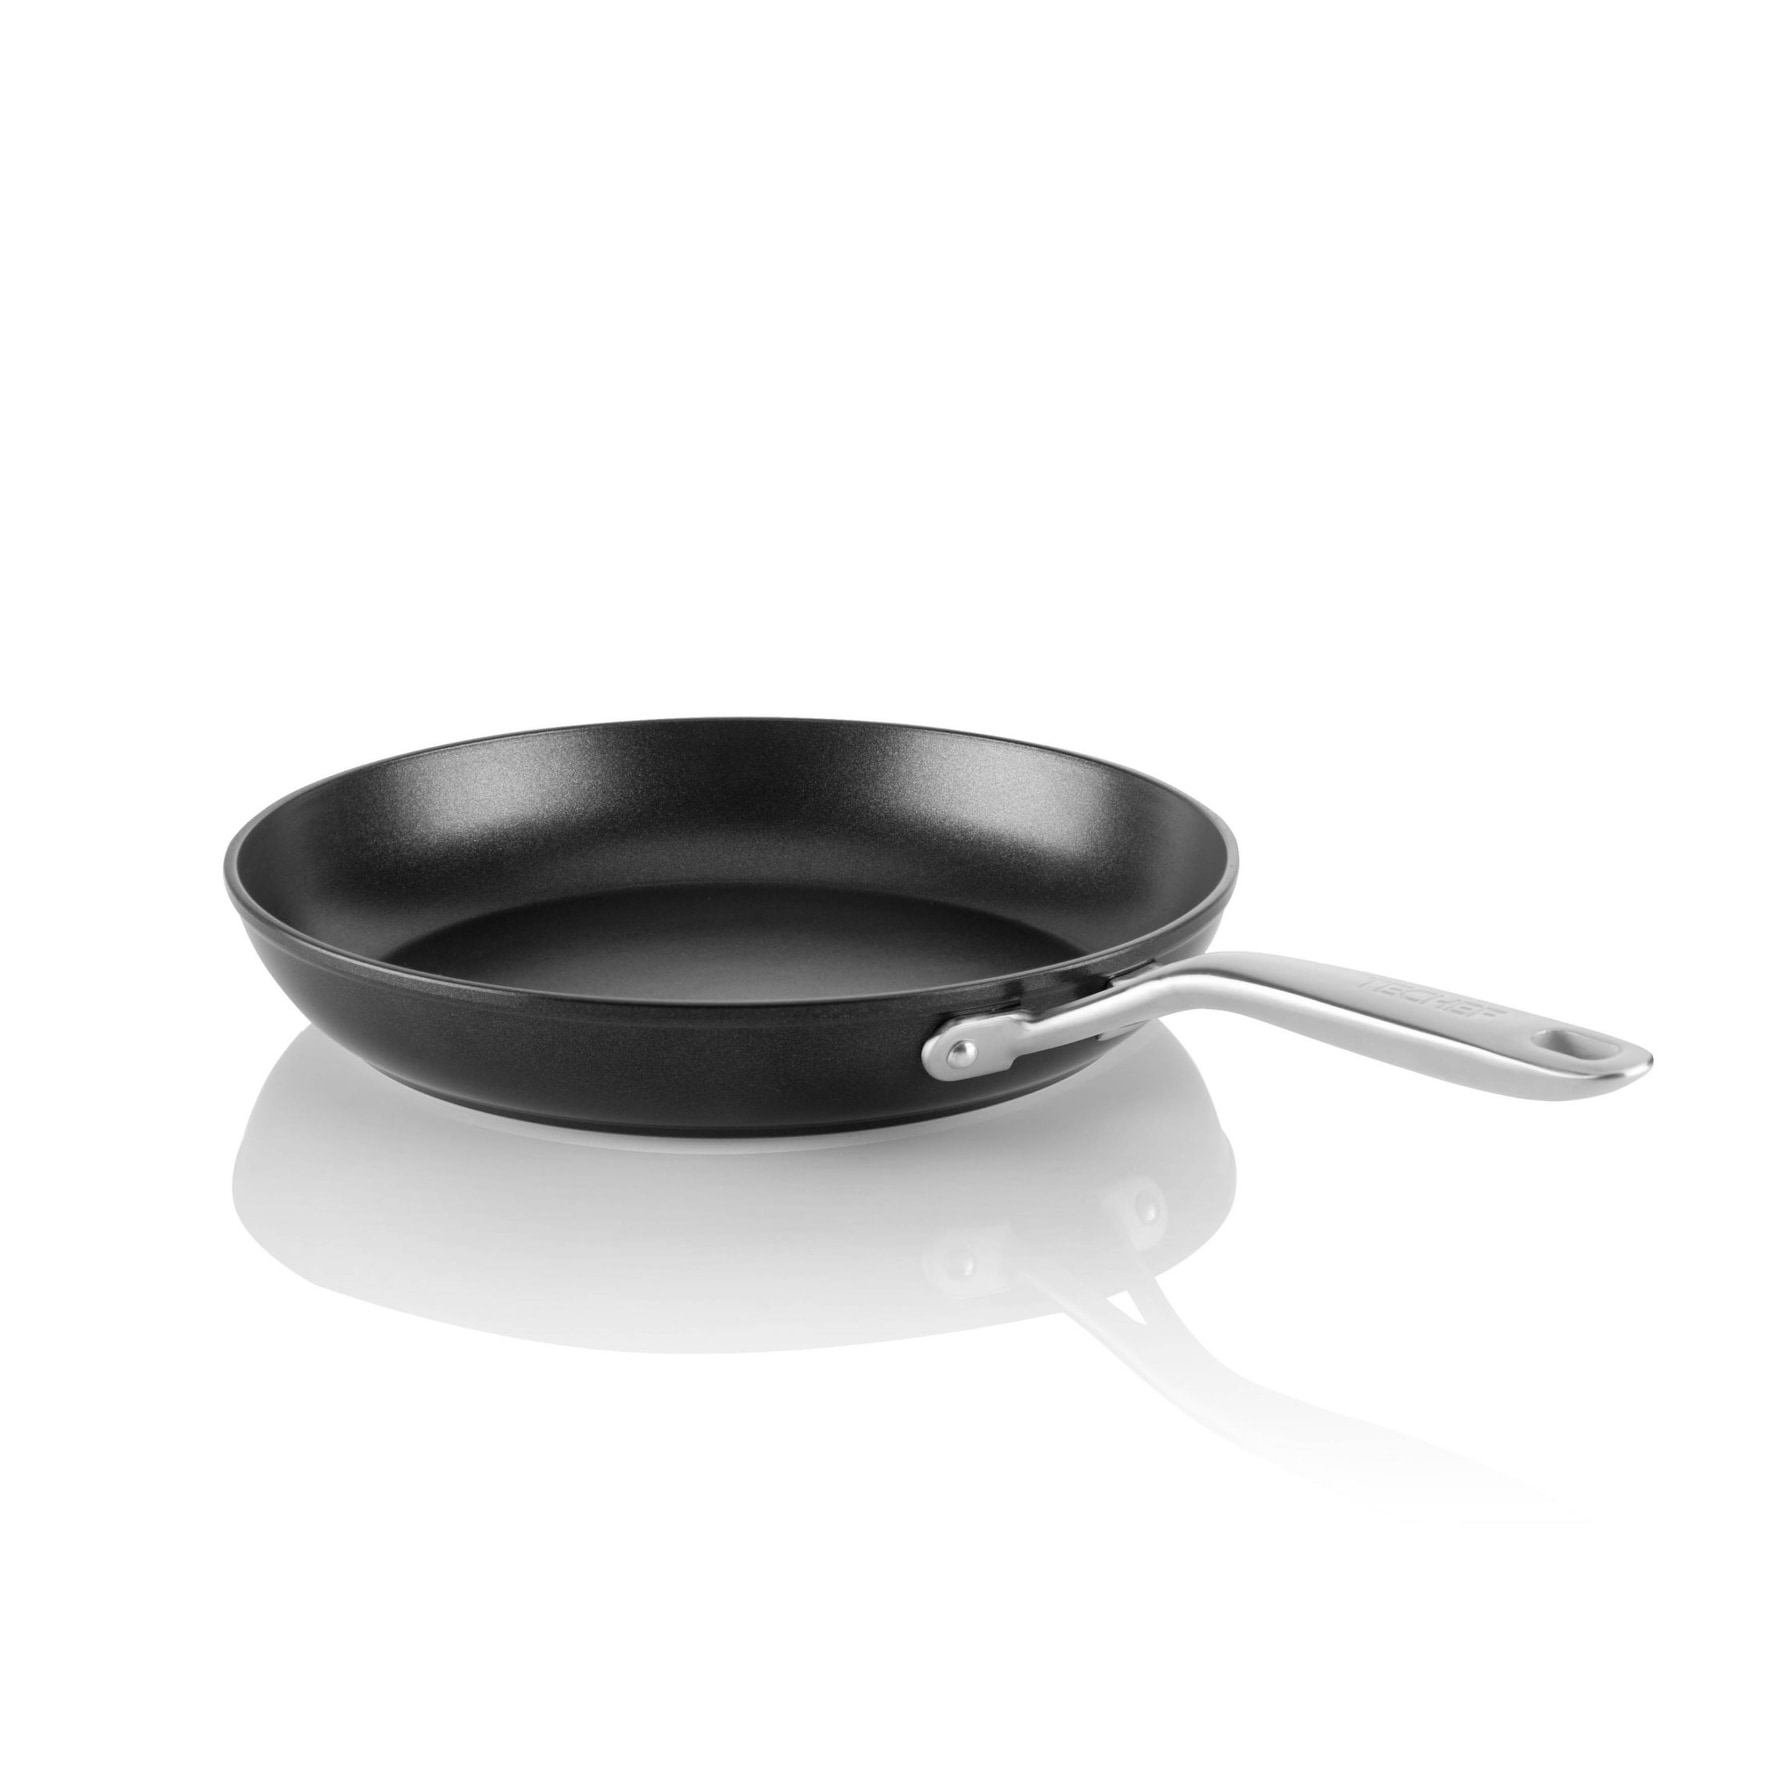 TECHEF Stir-Fry Pan with Glass Lid Onyx Collection 12-Inch Nonstick Wok 